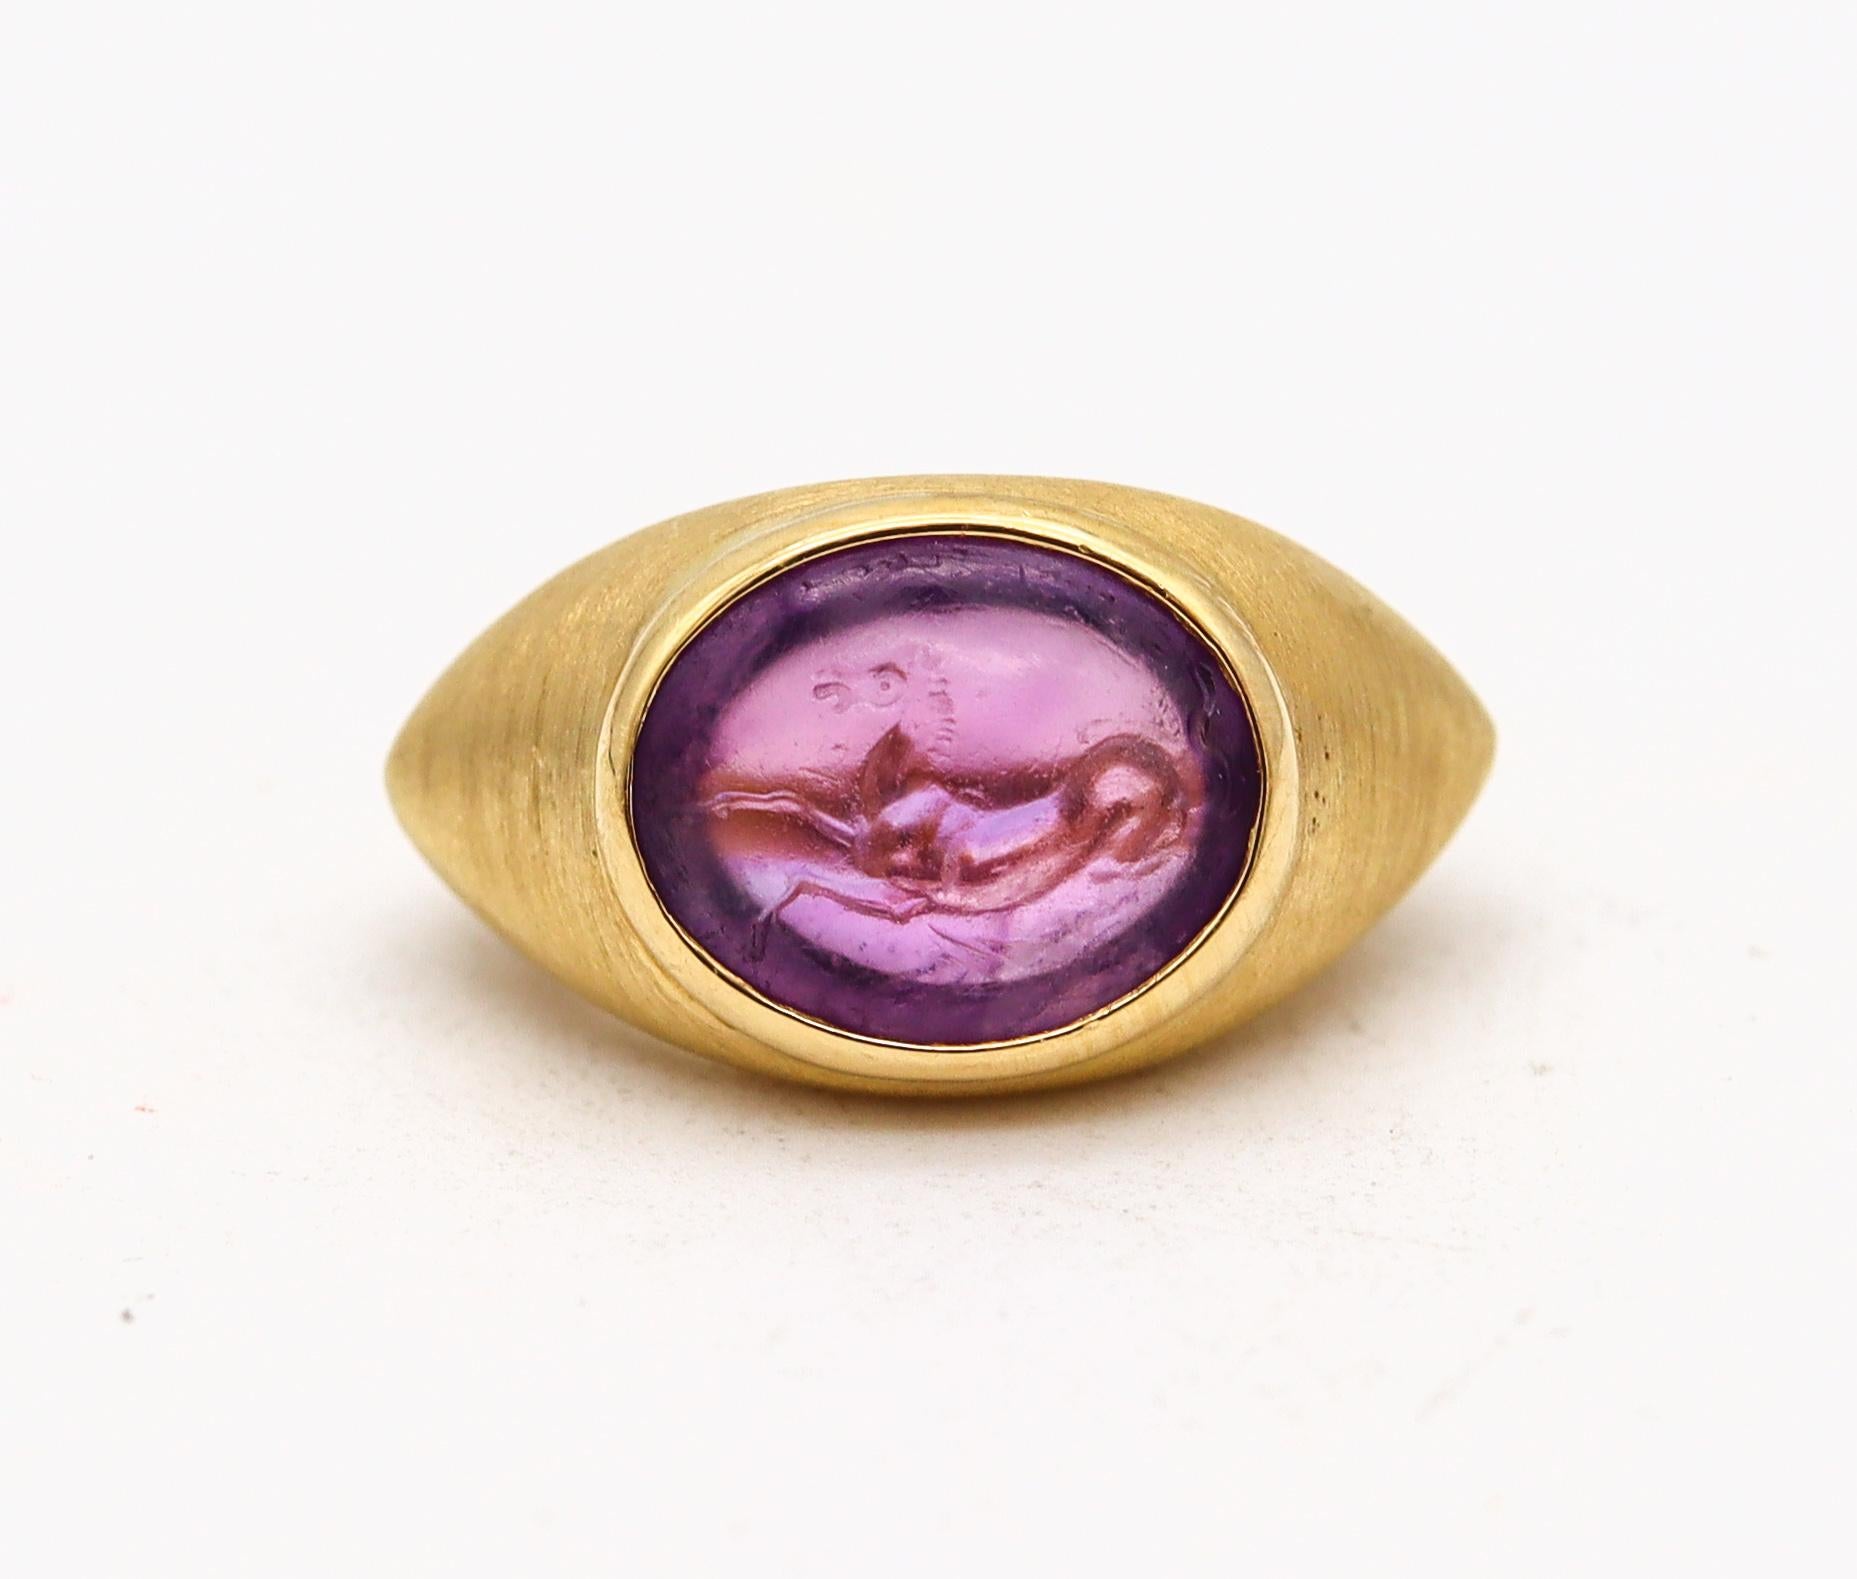 Intaglio signet ring designed by Bvlgari.

Gorgeous signet ring, created in Roma Italy by the jewelry house of Bvlgari, back in the 1970. This rare vintage ring was carefully crafted in solid yellow gold of 18 karats with a bezel on top in 20